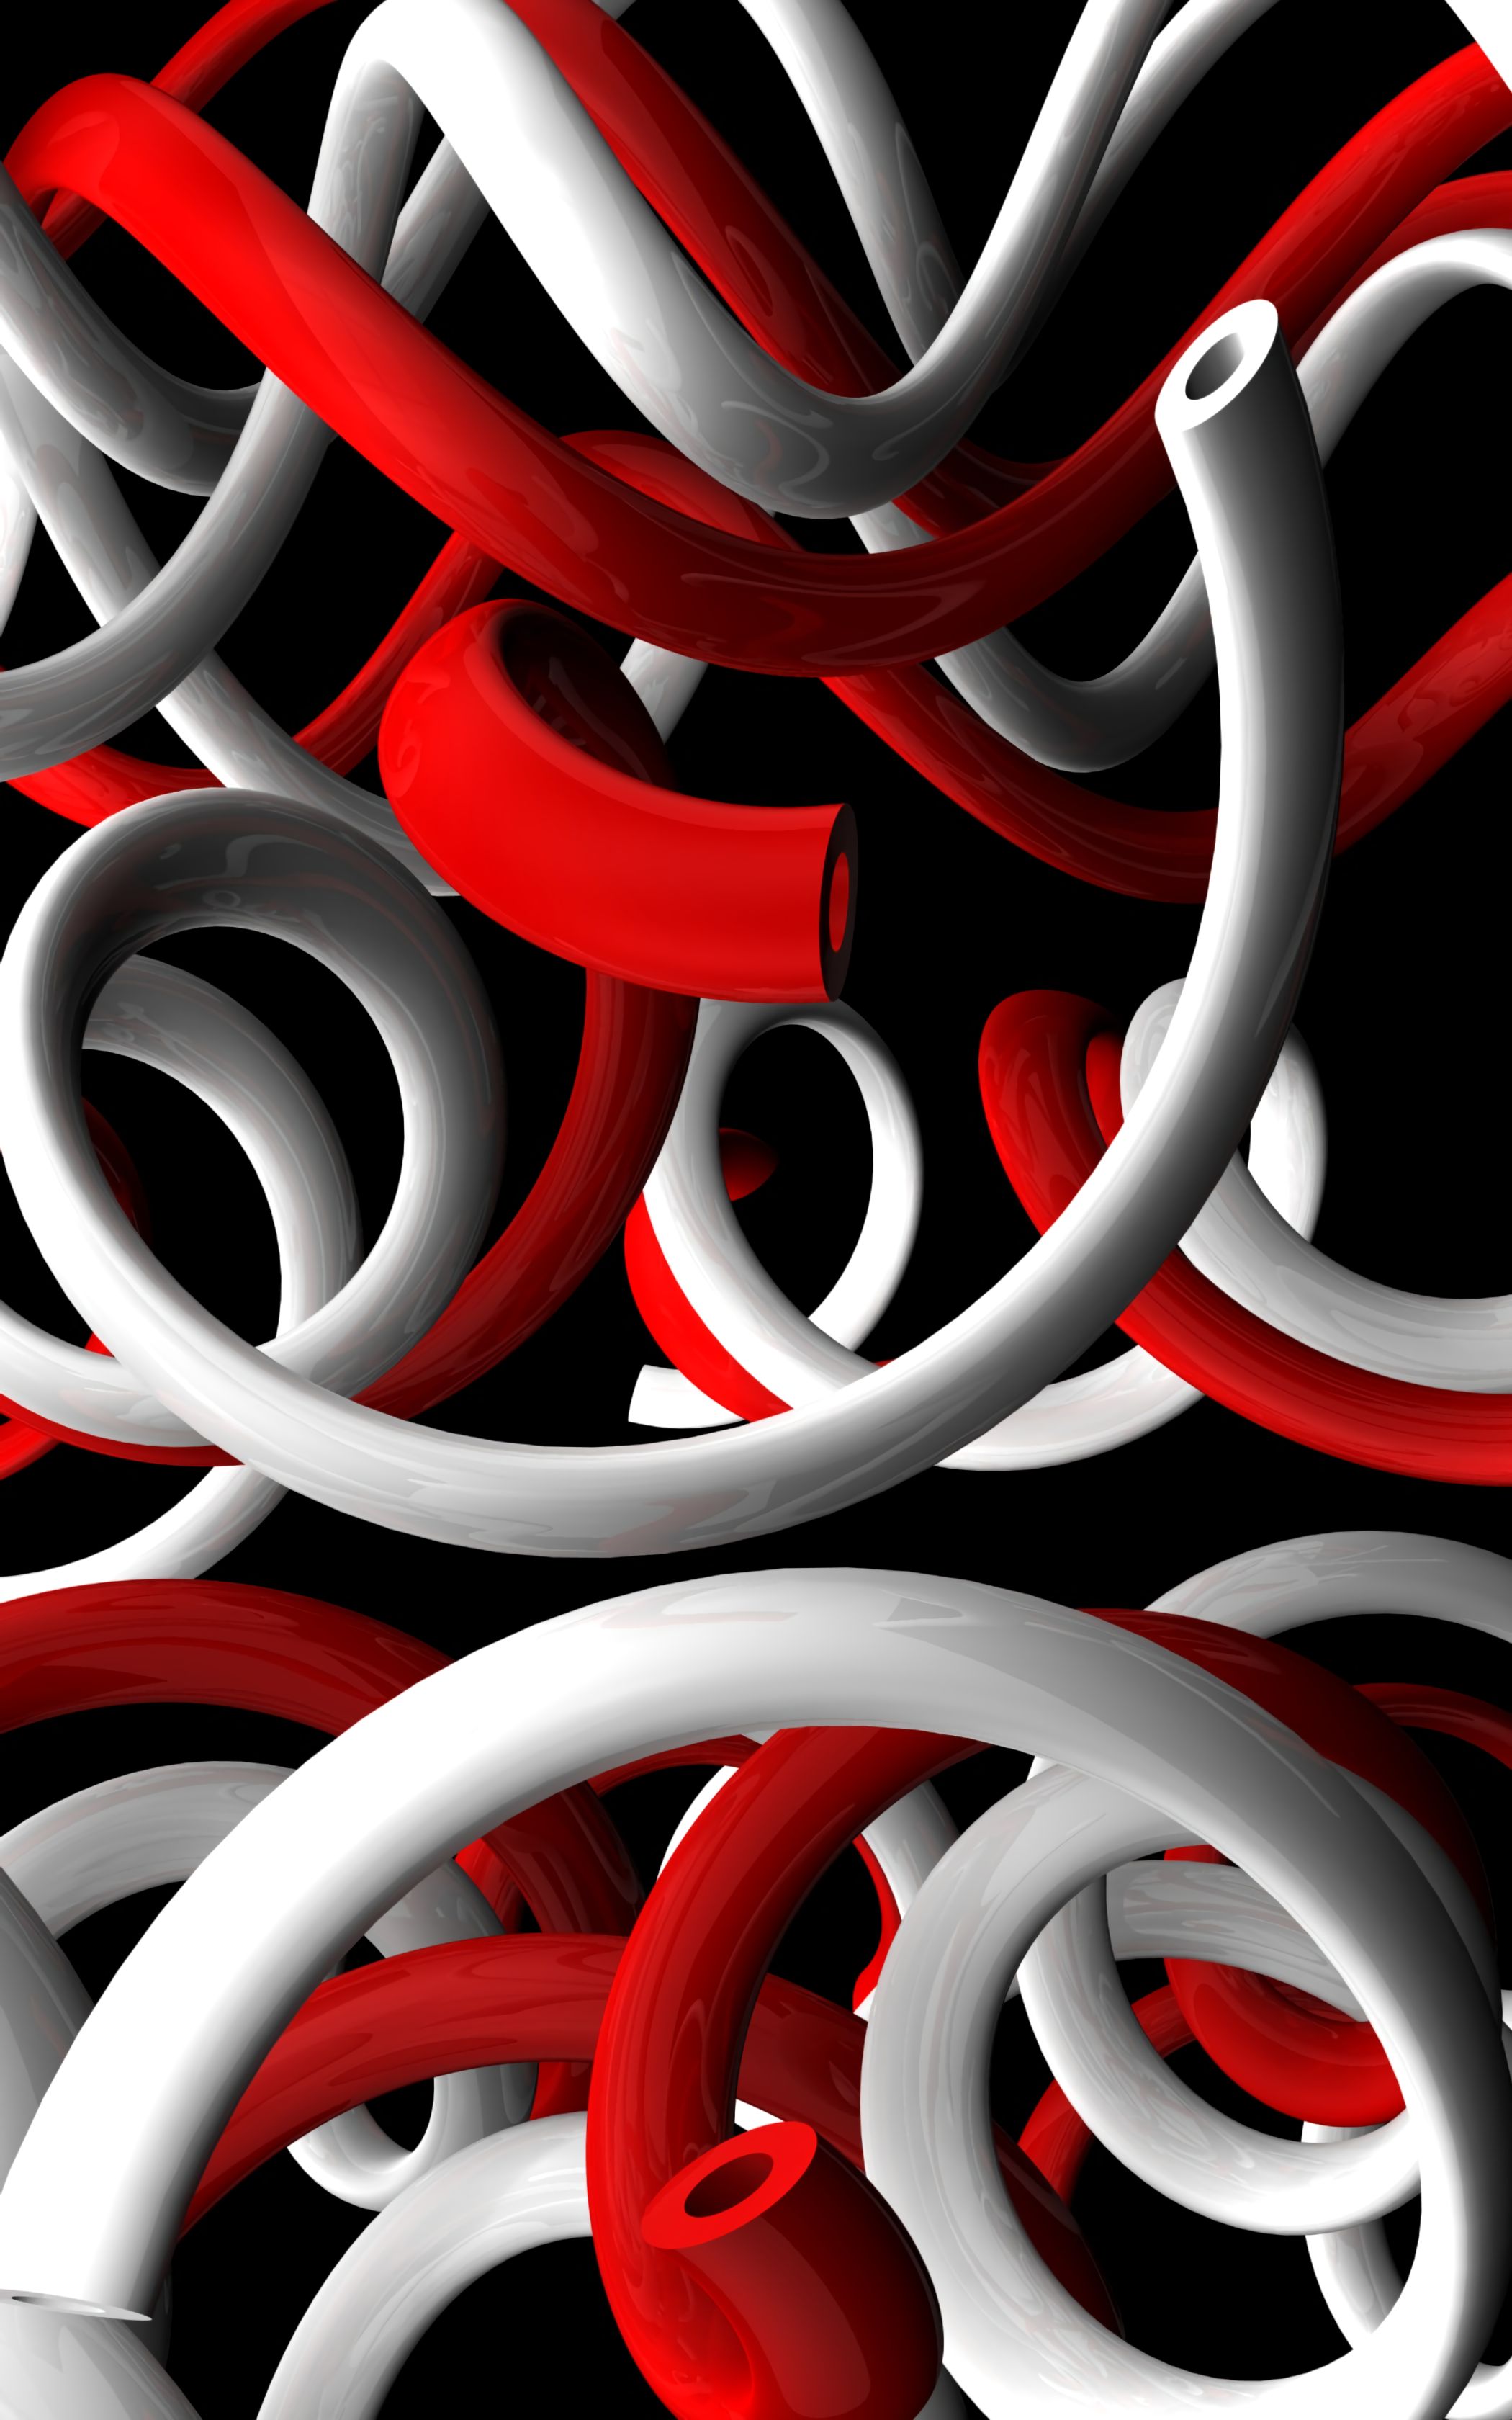 curved, white, involute, plexus, 3d, red, form, forms, swirling, bent